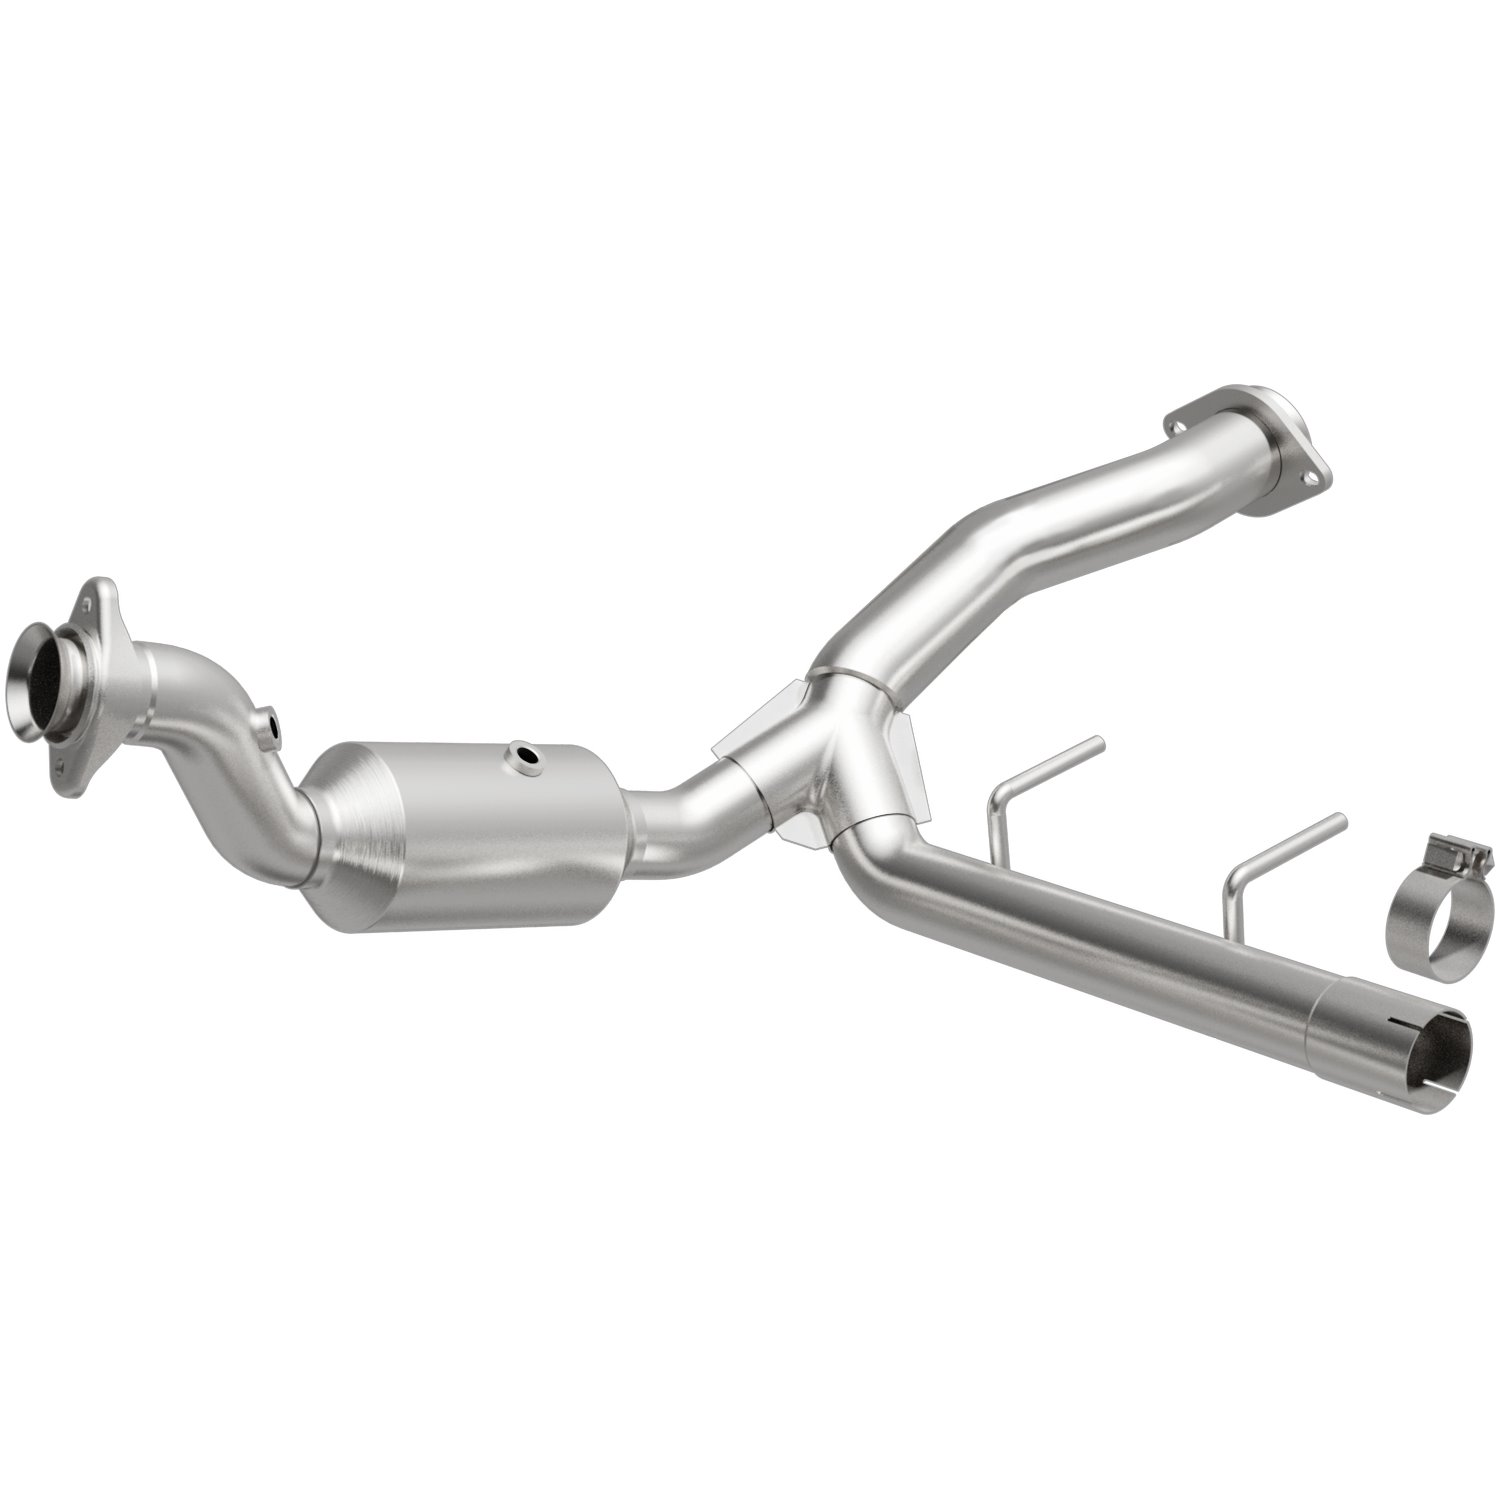 2015-2020 Ford F-150 OEM Grade Federal / EPA Compliant Direct-Fit Catalytic Converter 21-475